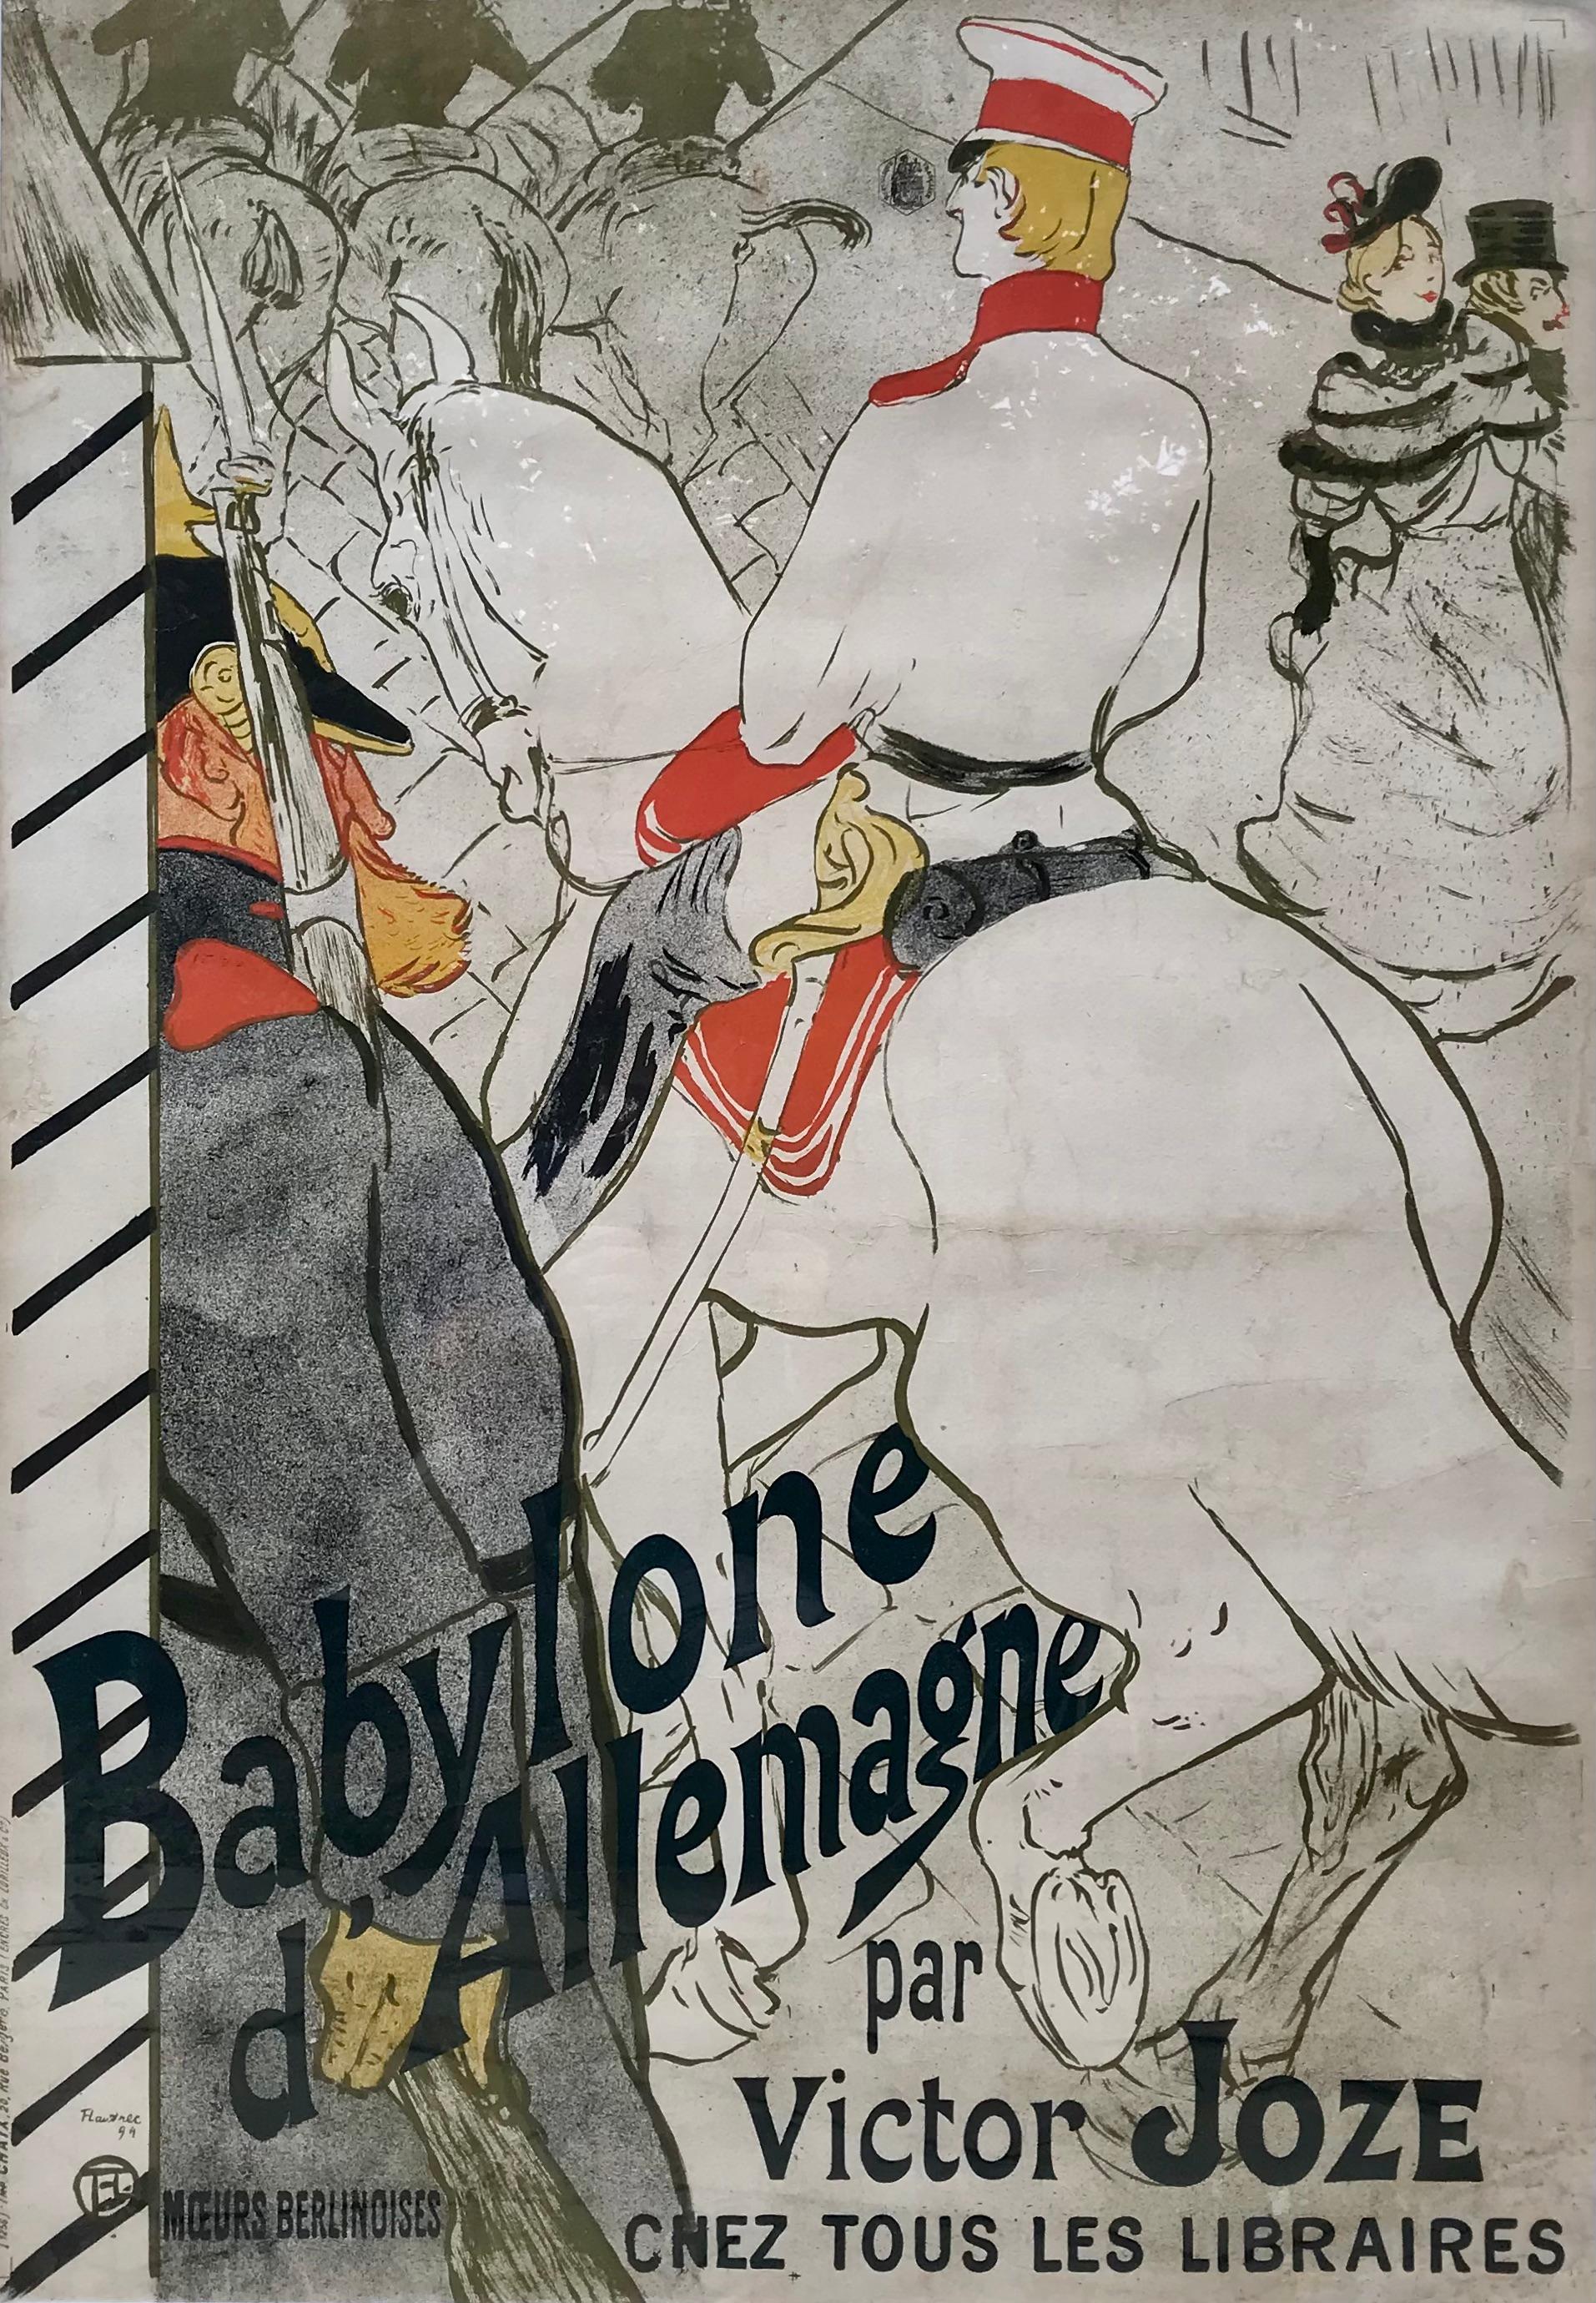 Henri De Toulouse-Lautrec (French 1864 - 1901)
BABYLONE D'ALLEMAGNE Printed in 1894

Lithograph printed in colors, 1894, on linen-backed wove paper, printed by Chaix, Paris, tastefully framed with archival materials.

Condition: Linen lined. Wear